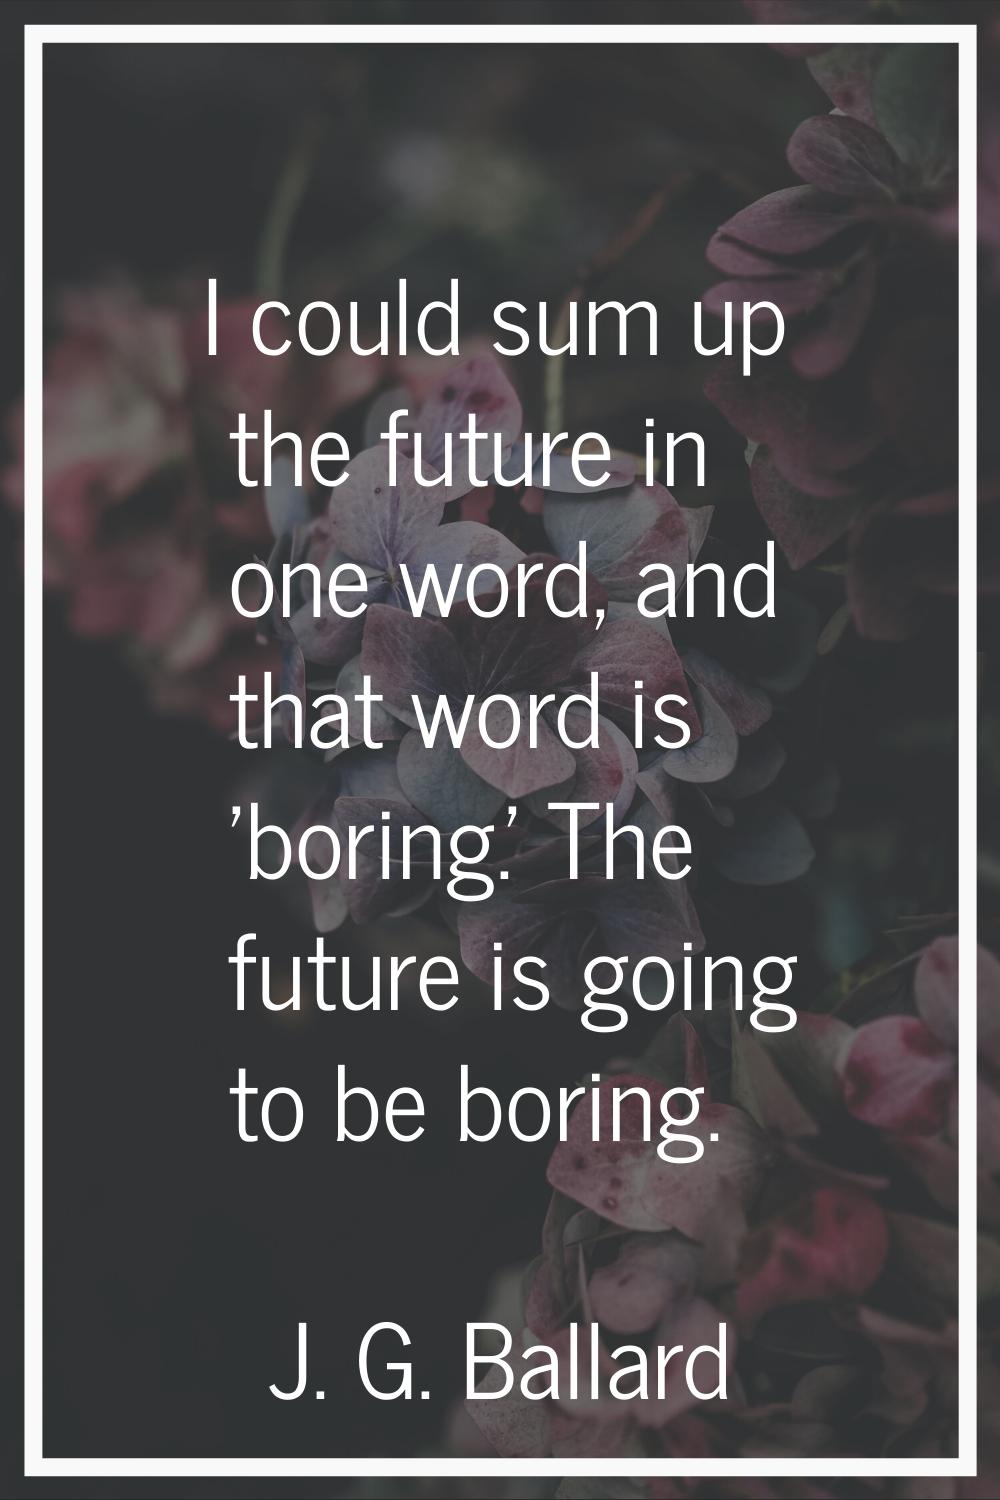 I could sum up the future in one word, and that word is 'boring.' The future is going to be boring.